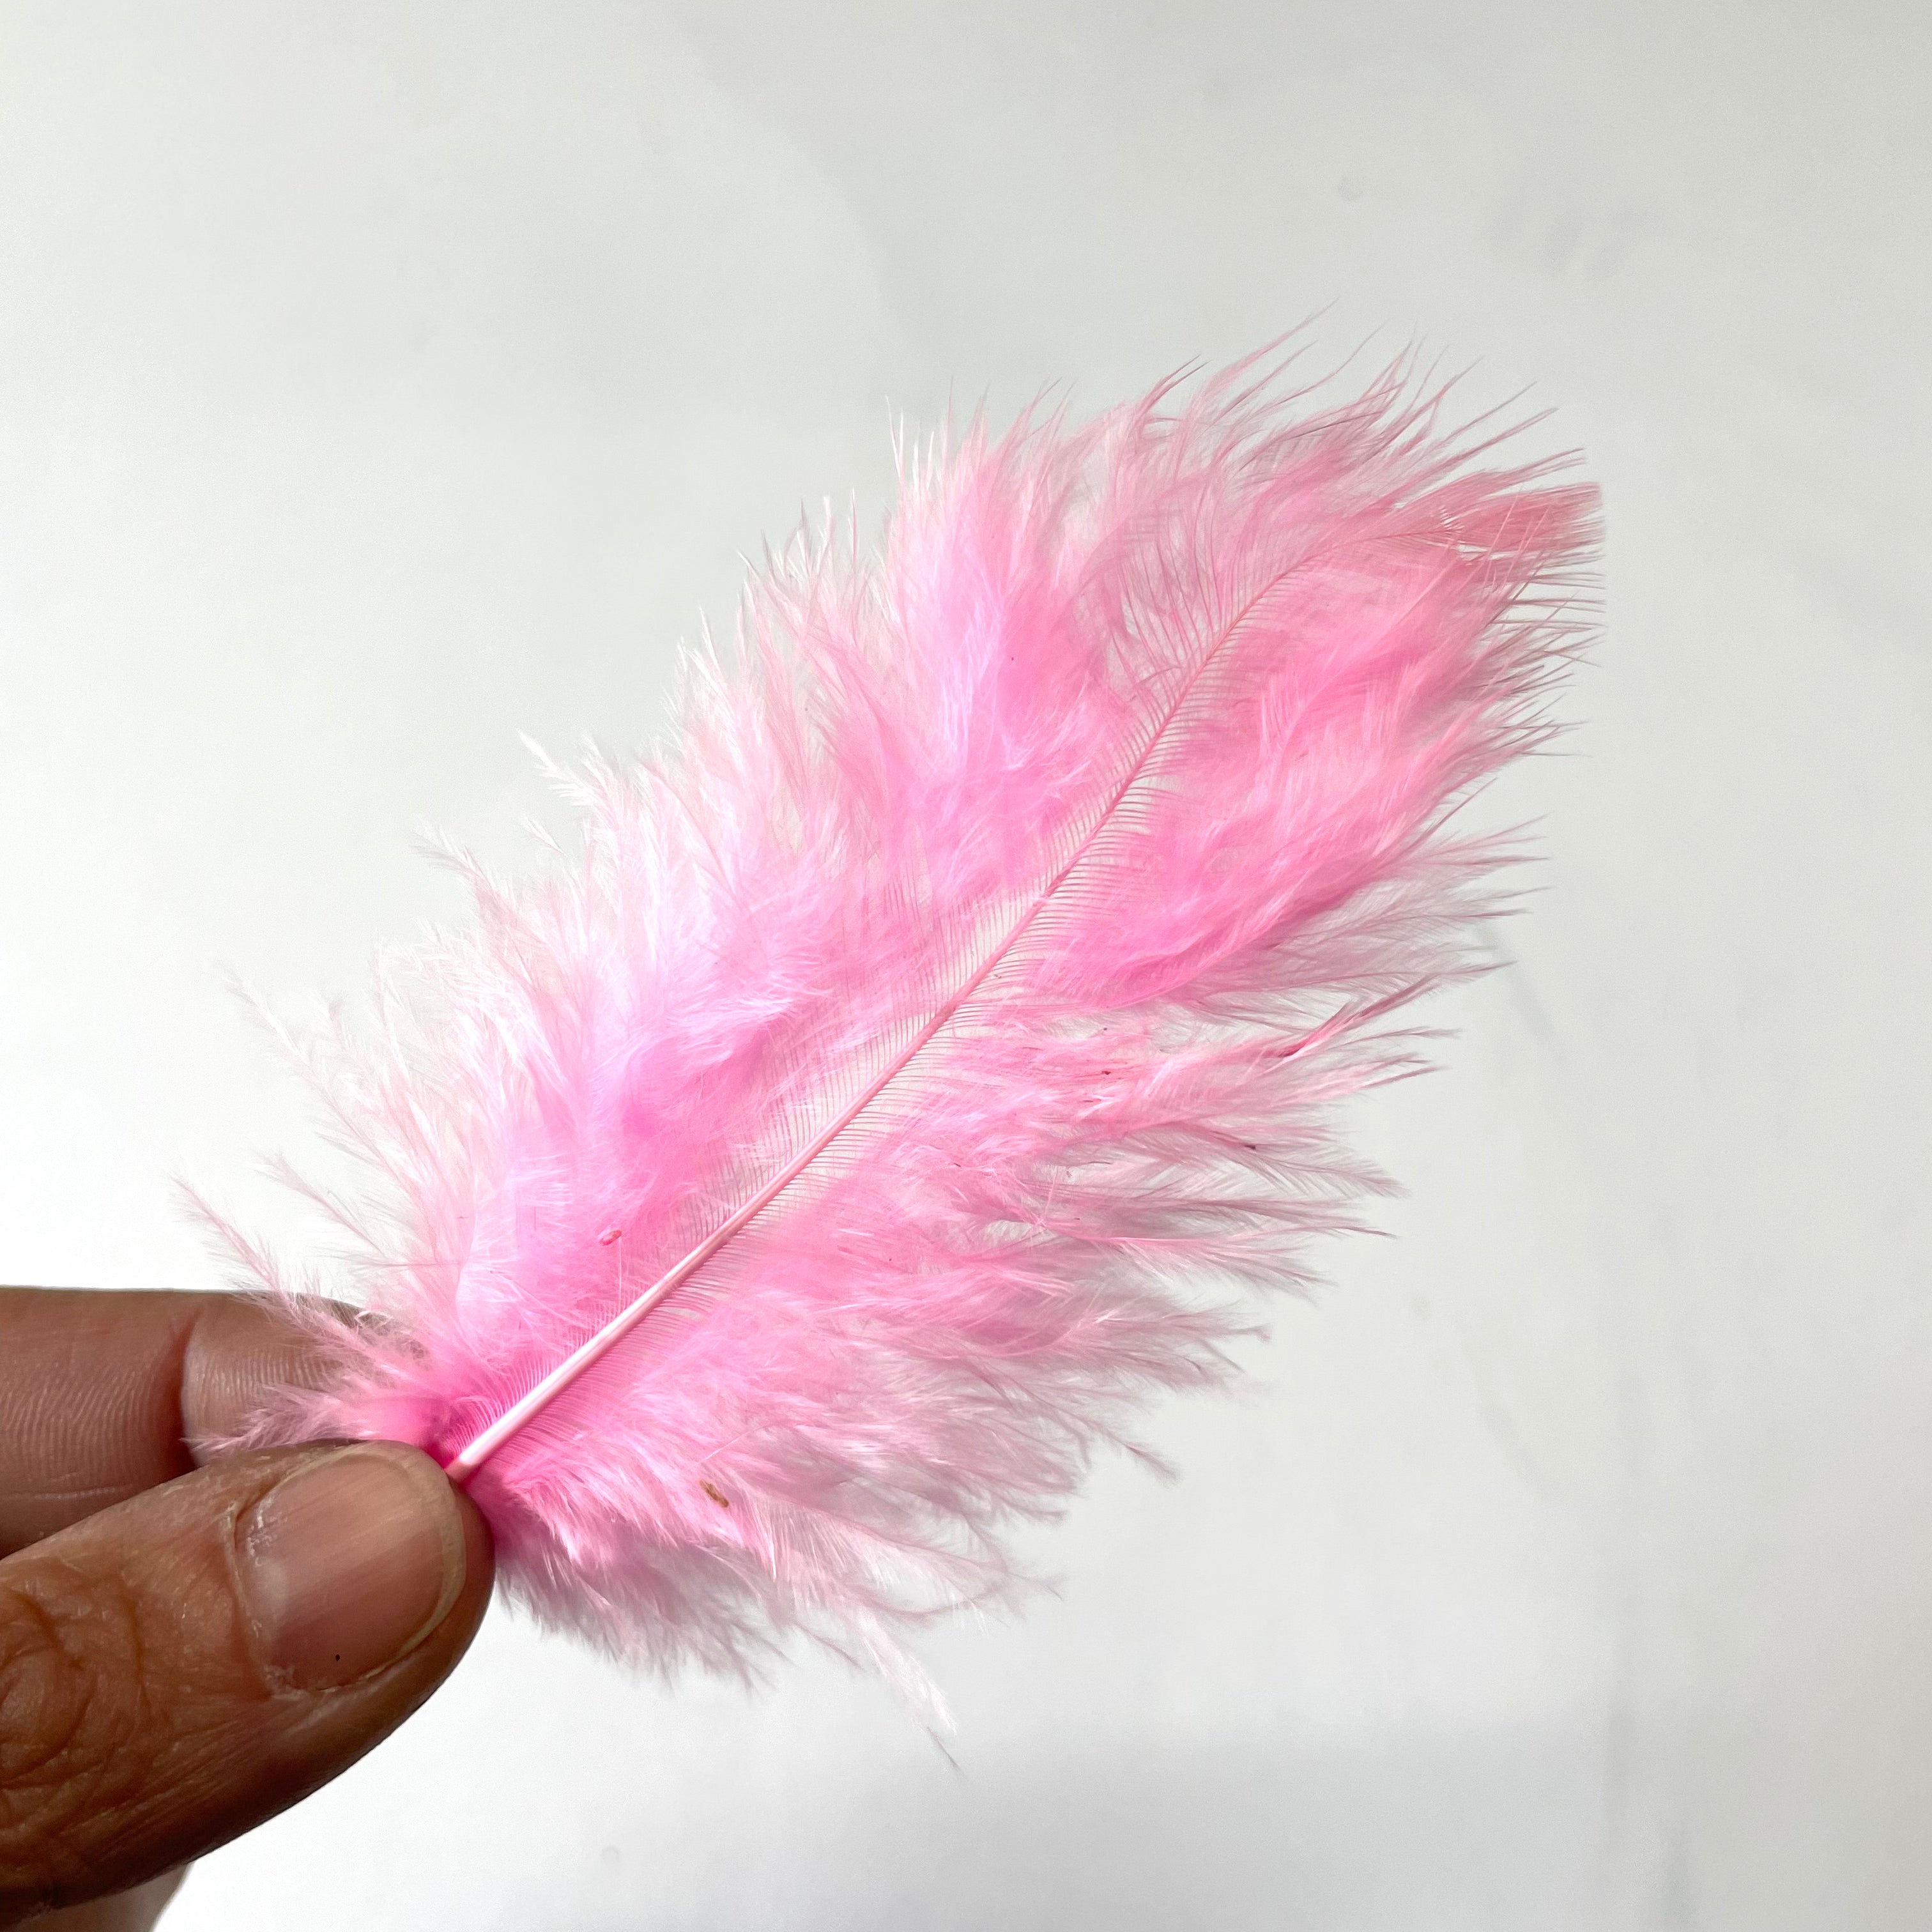 Fluffy Marabou Feather Plumage Pack 10 grams - Candy Pink